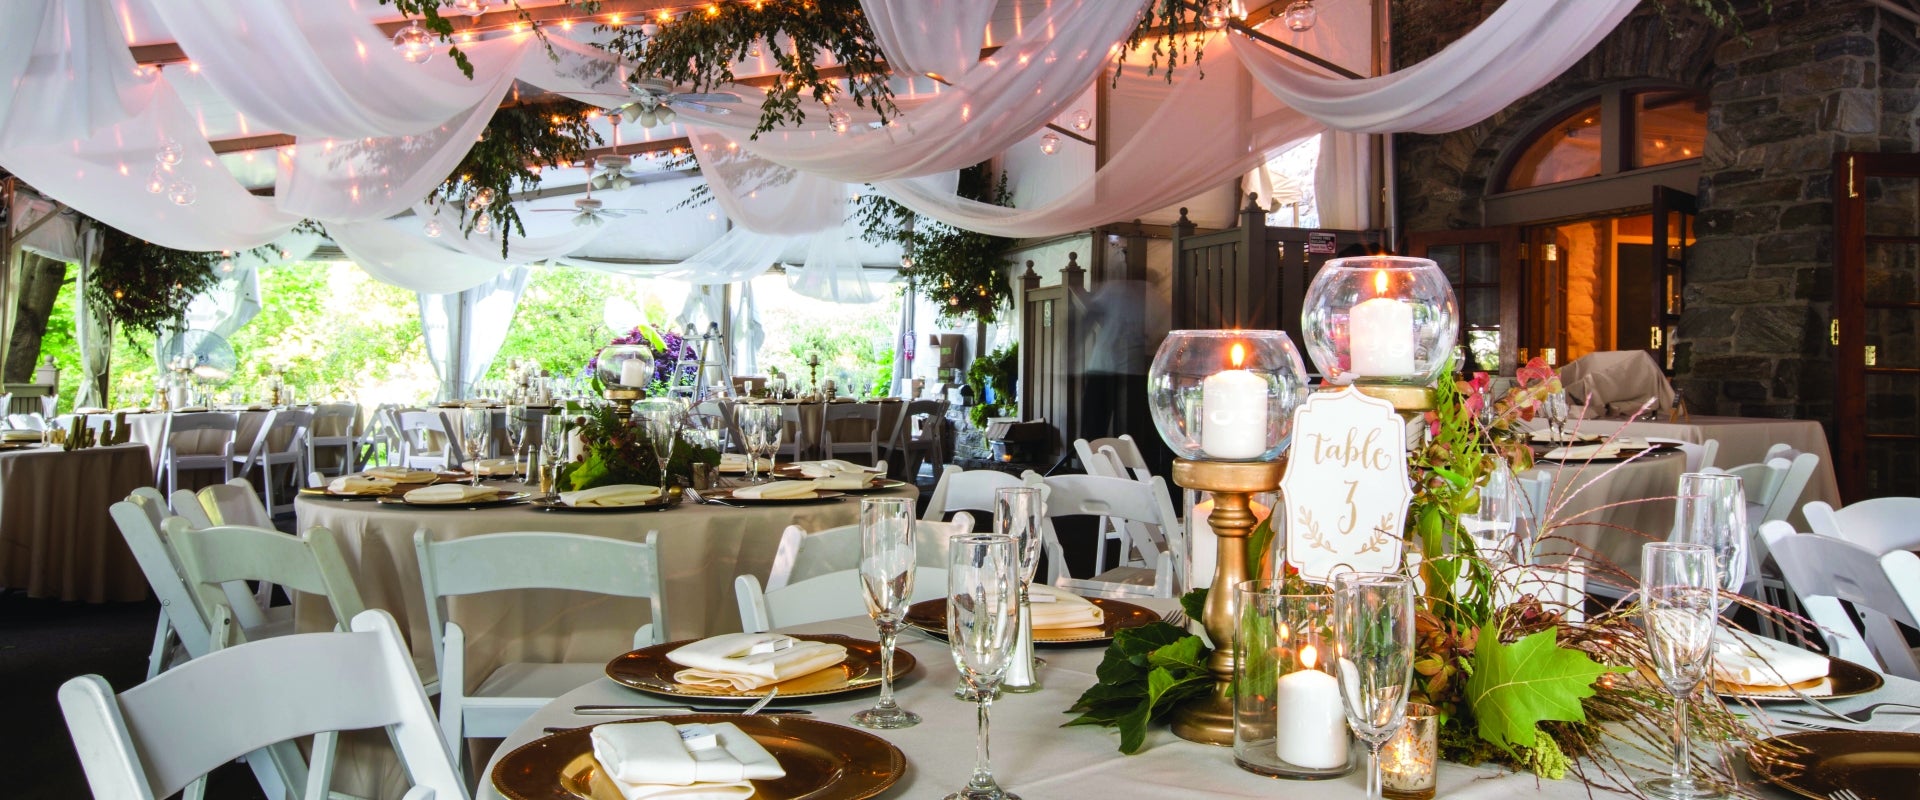 An outdoor tent decorated with lights, linens, candles, and table settings for a wedding. 